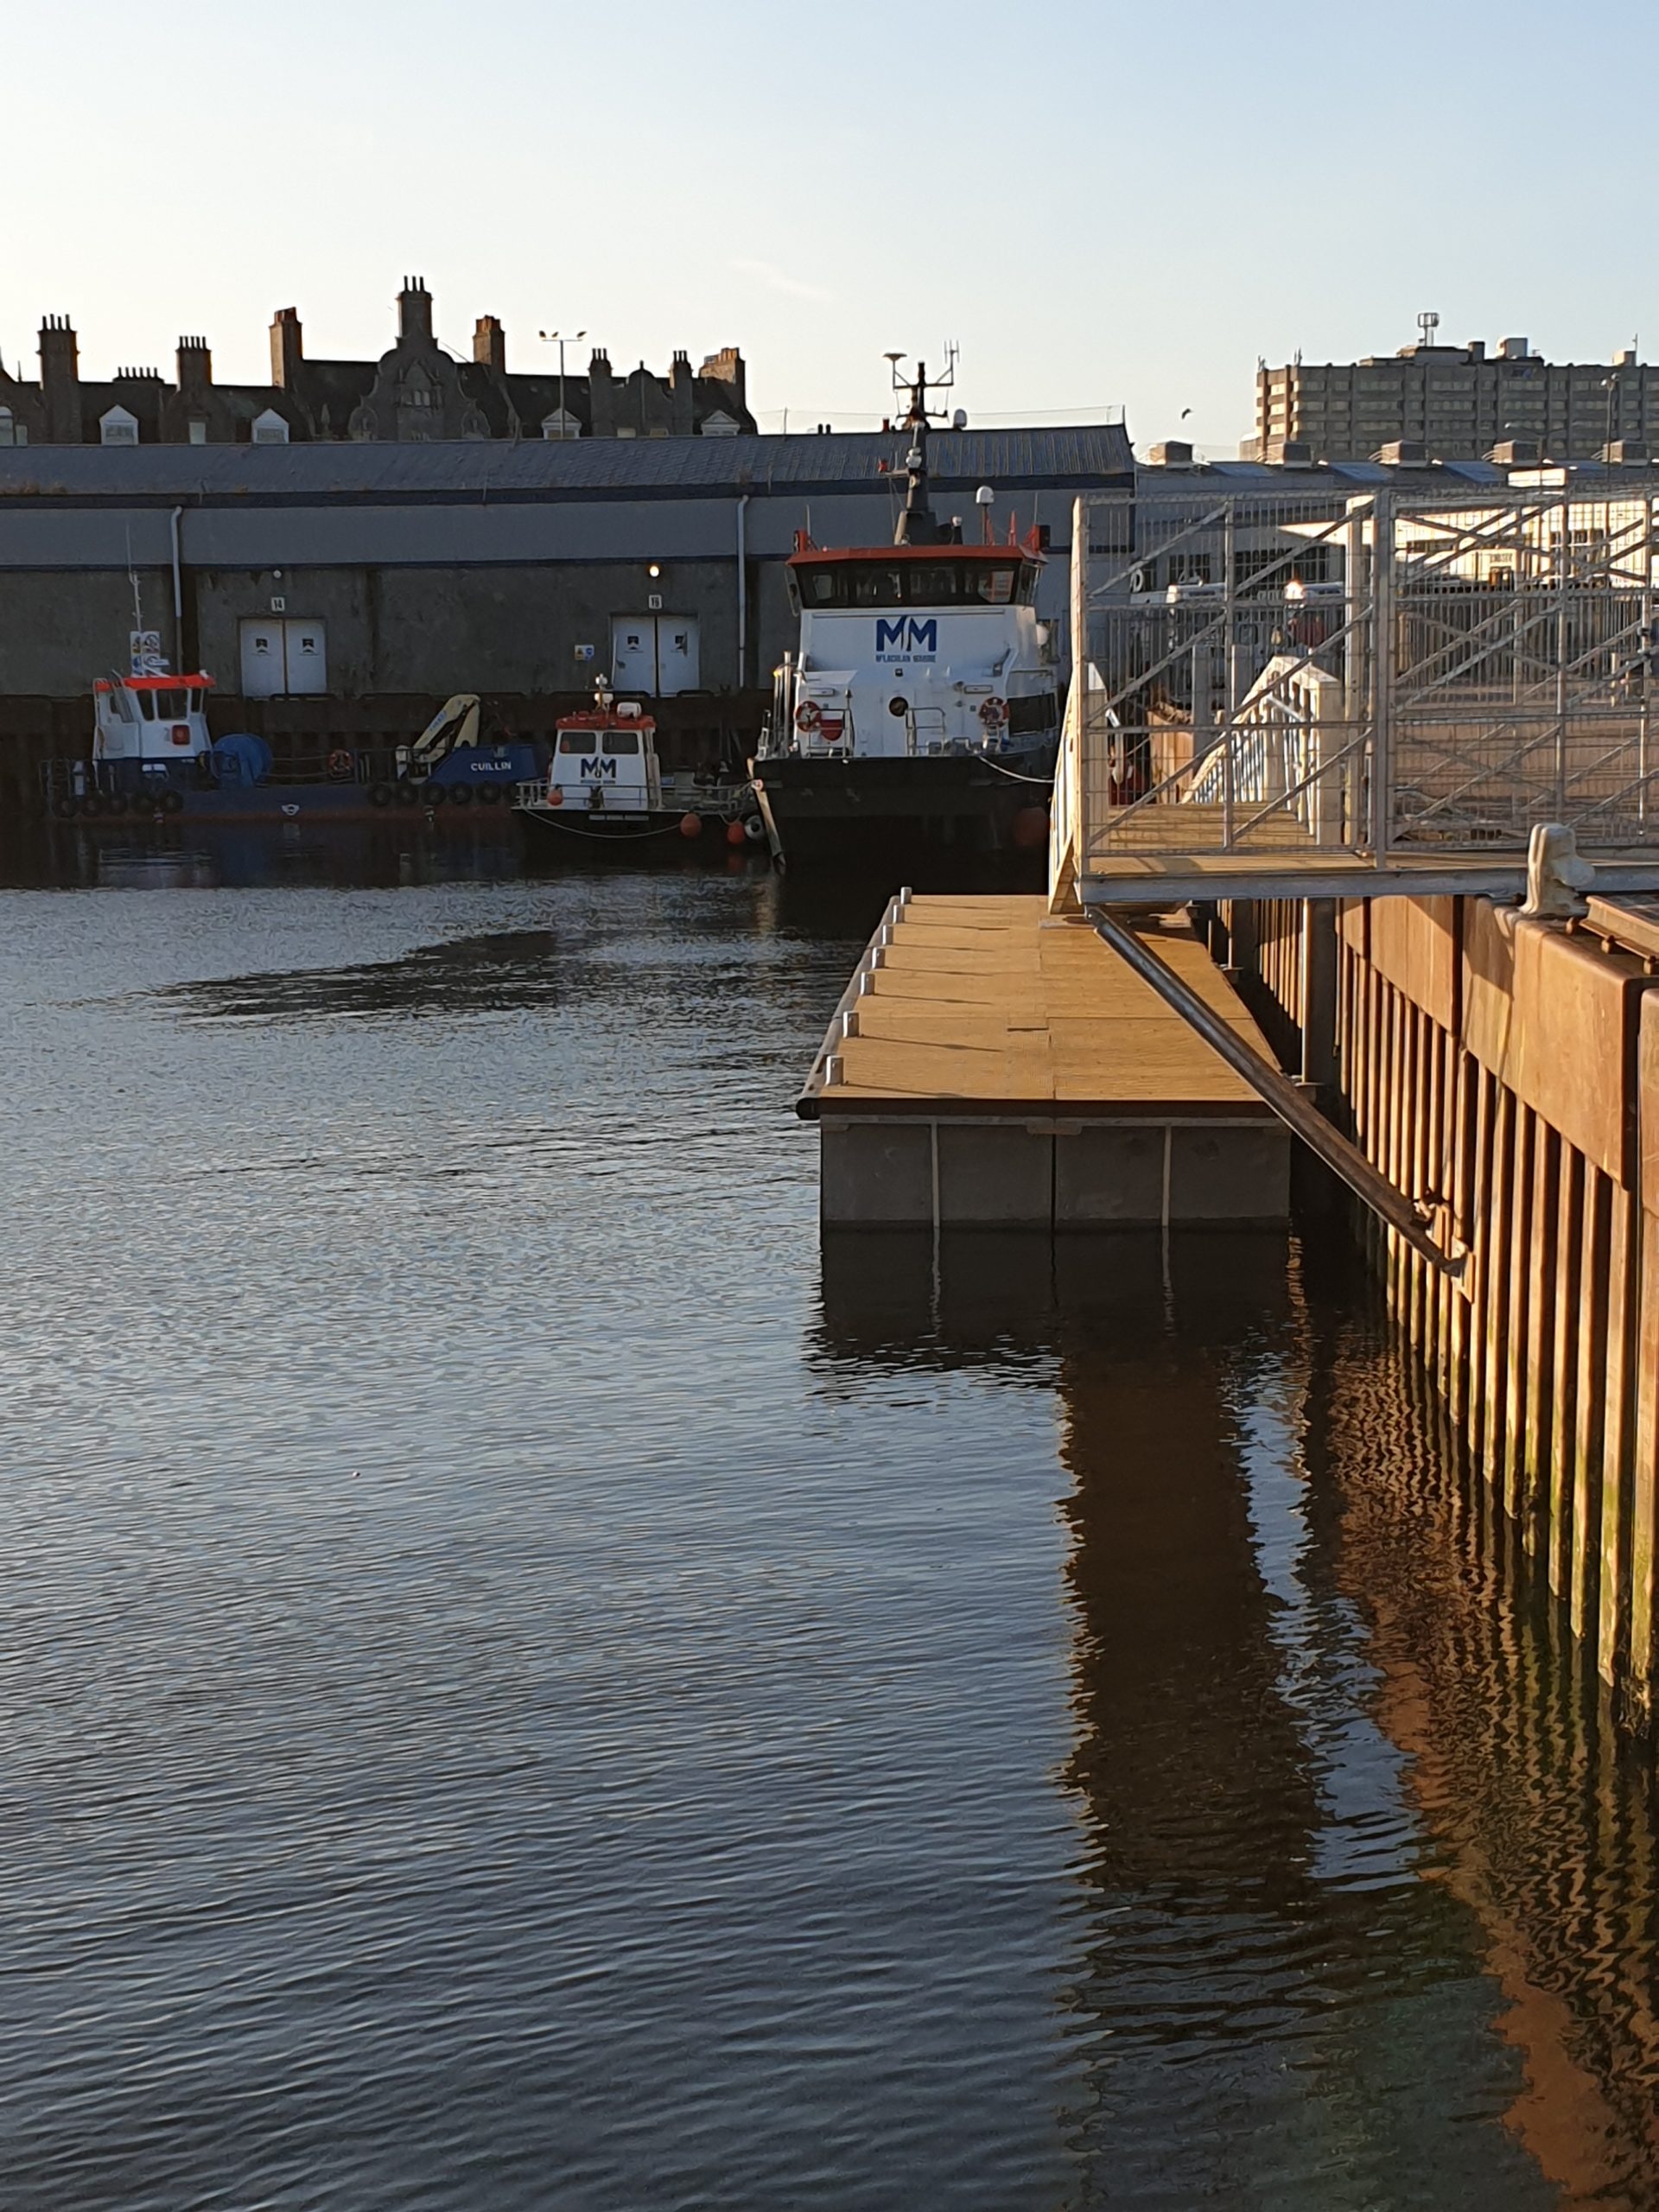 End view of a pontoon berth and gangway access